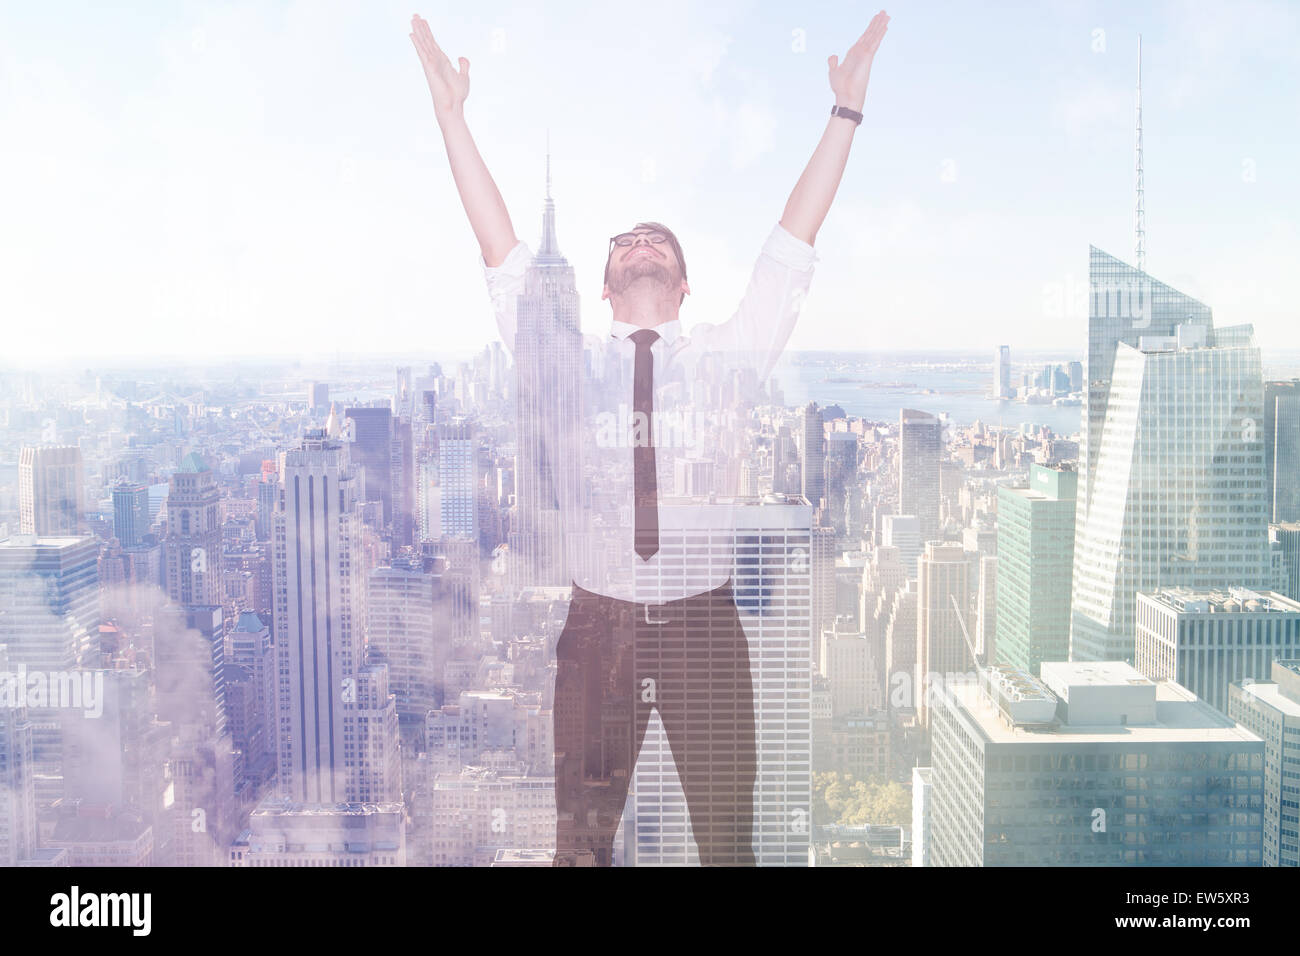 Composite image of smiling businessman cheering with his hands up Stock Photo